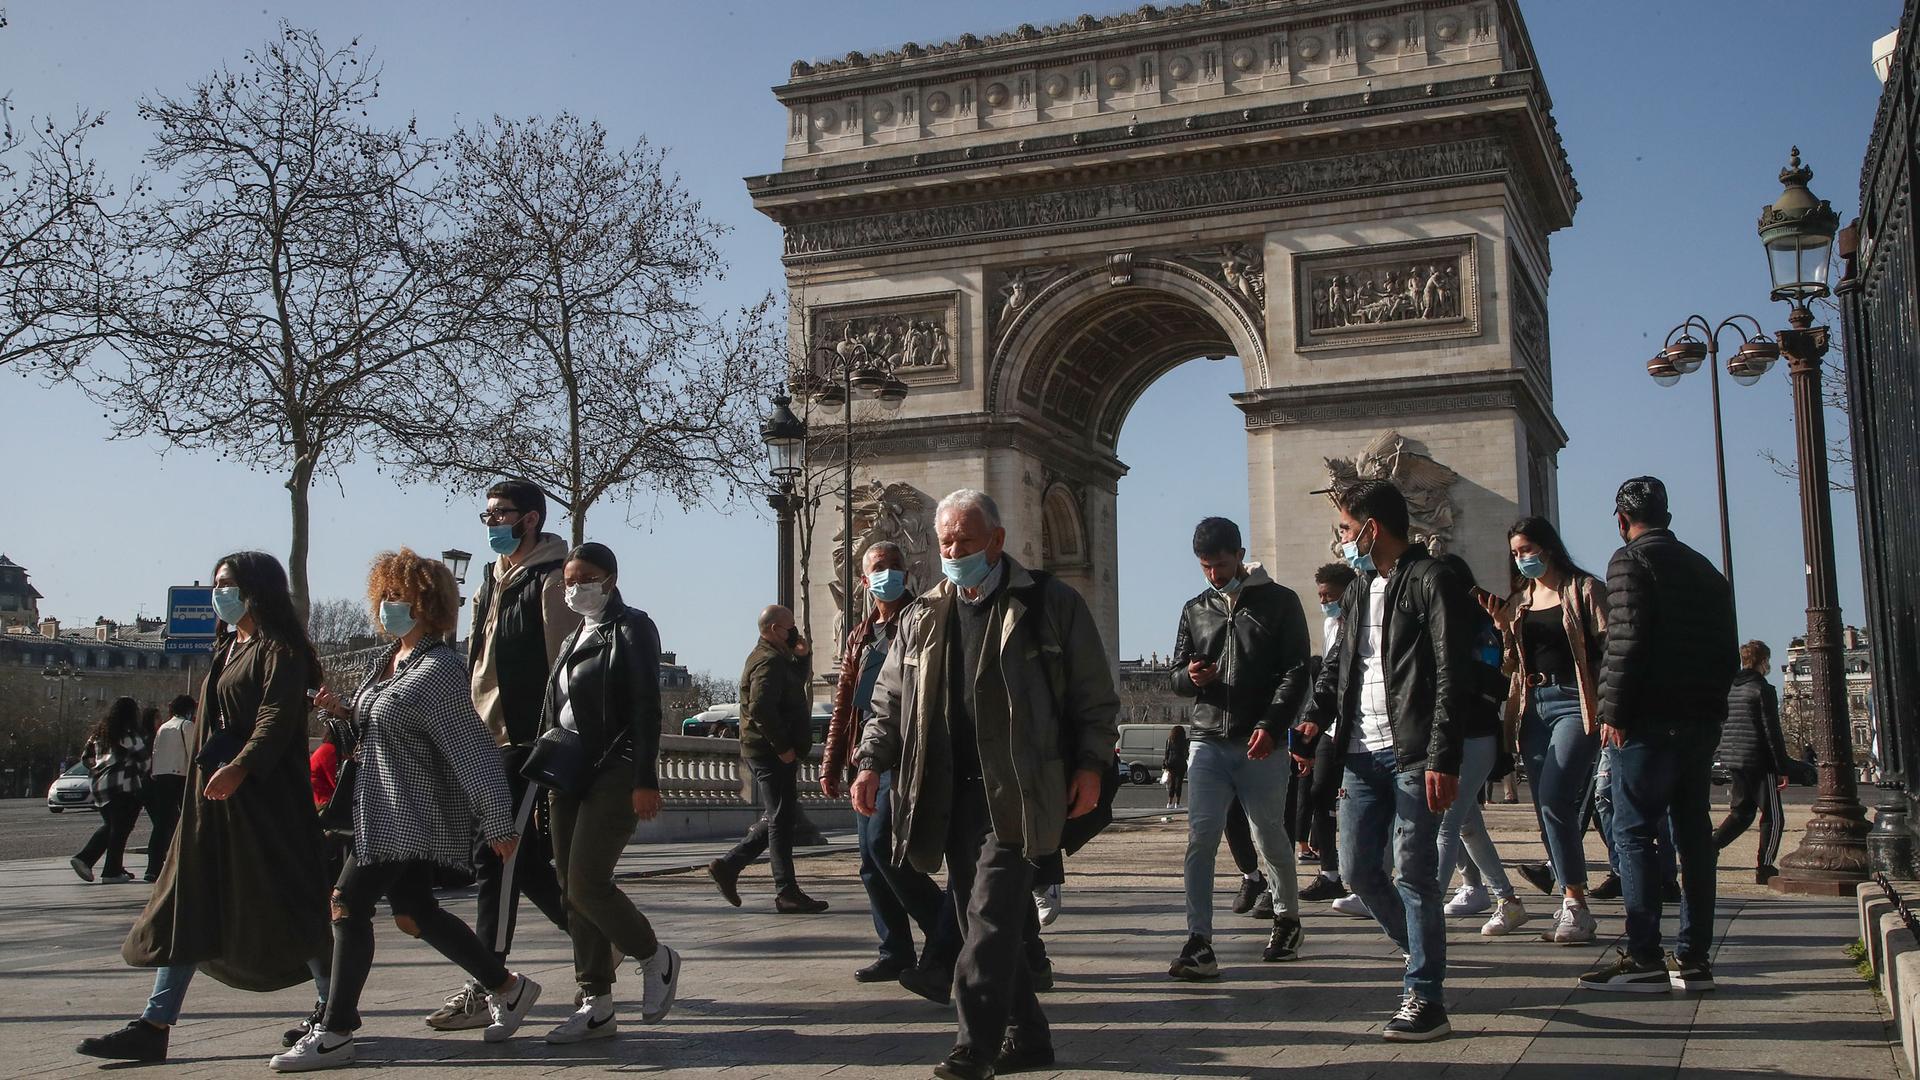 A crowd of people are shown walking with Paris' iconic Arc de Triomphe in the background.